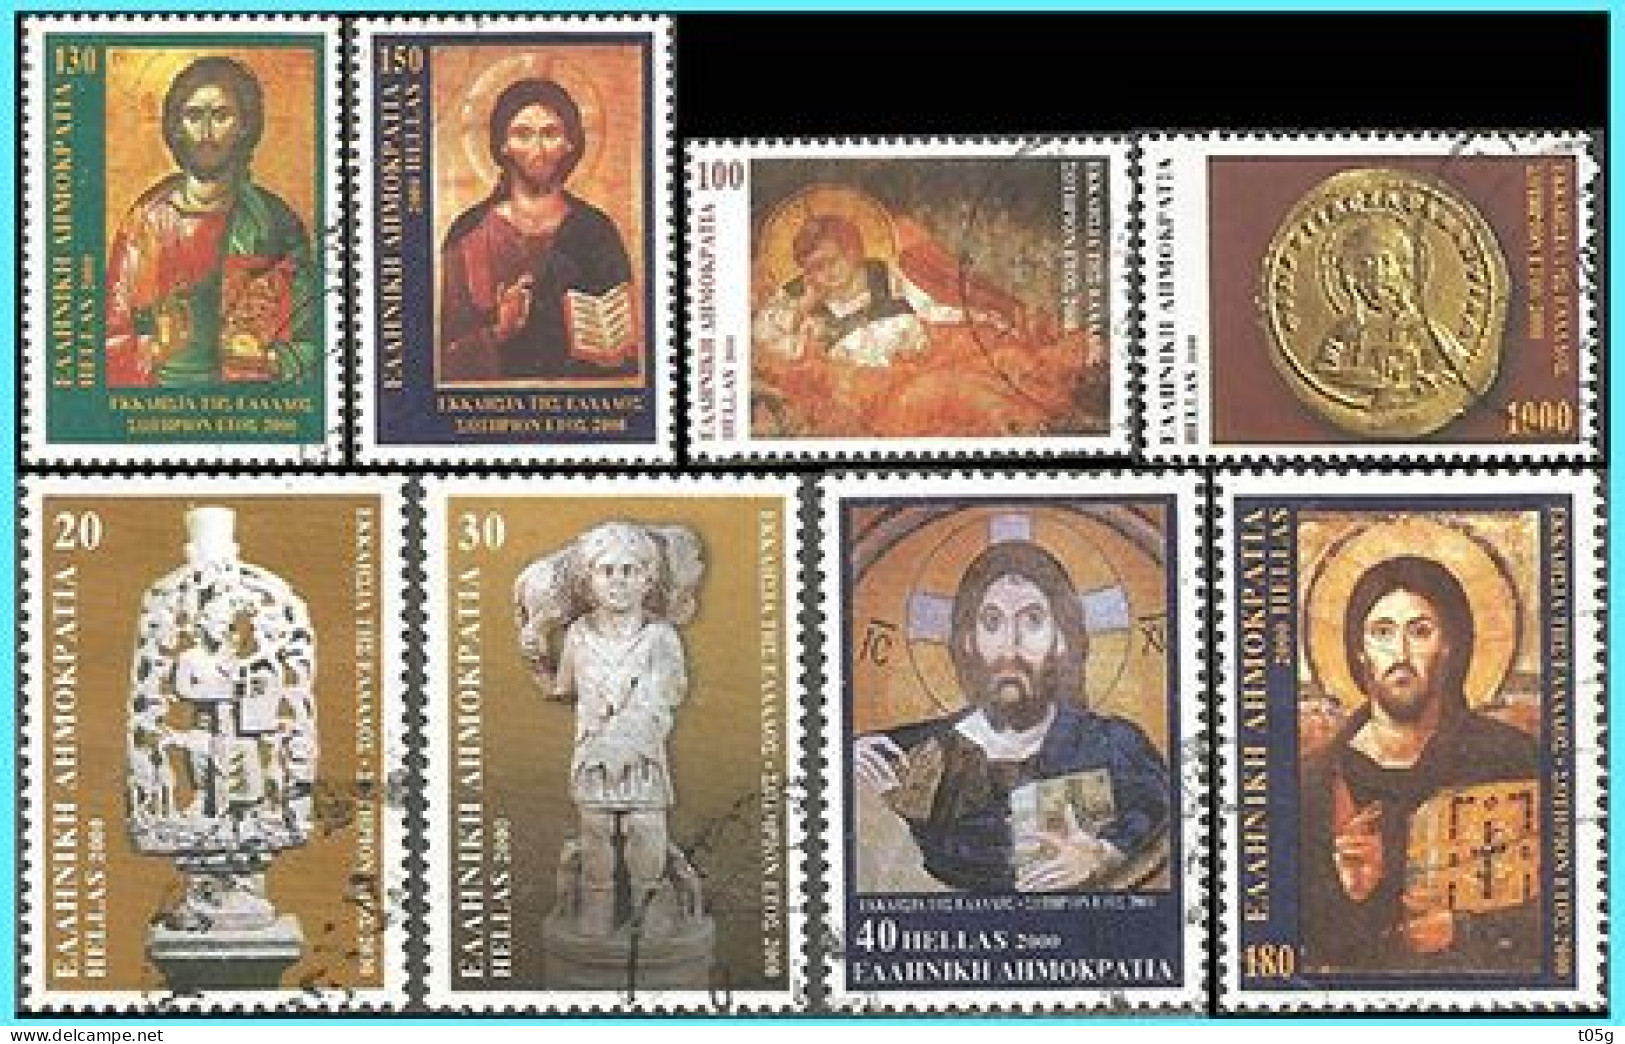 GREECE-GRECE- HELLAS  2000: Compl  Set  Used - Used Stamps